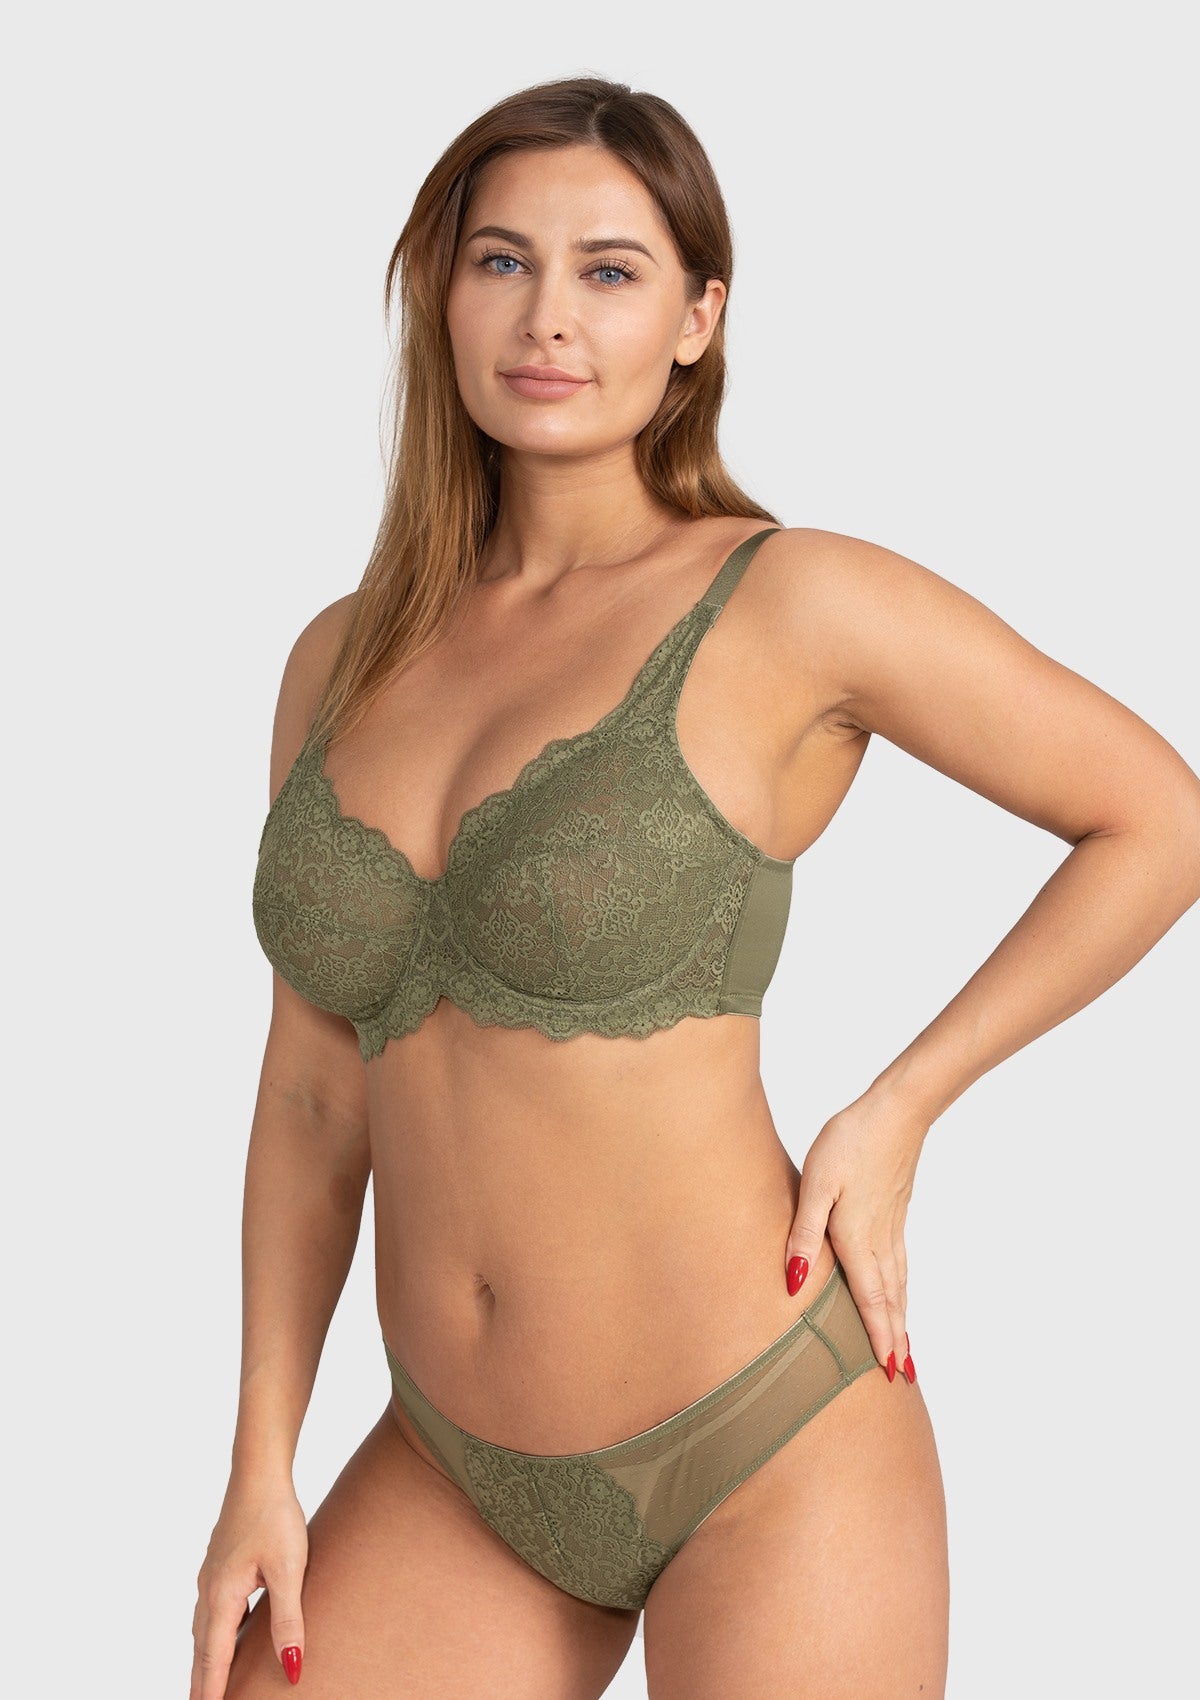 HSIA All-Over Floral Lace Unlined Bra: Minimizer Bra For Heavy Breasts - Dark Green / 40 / C